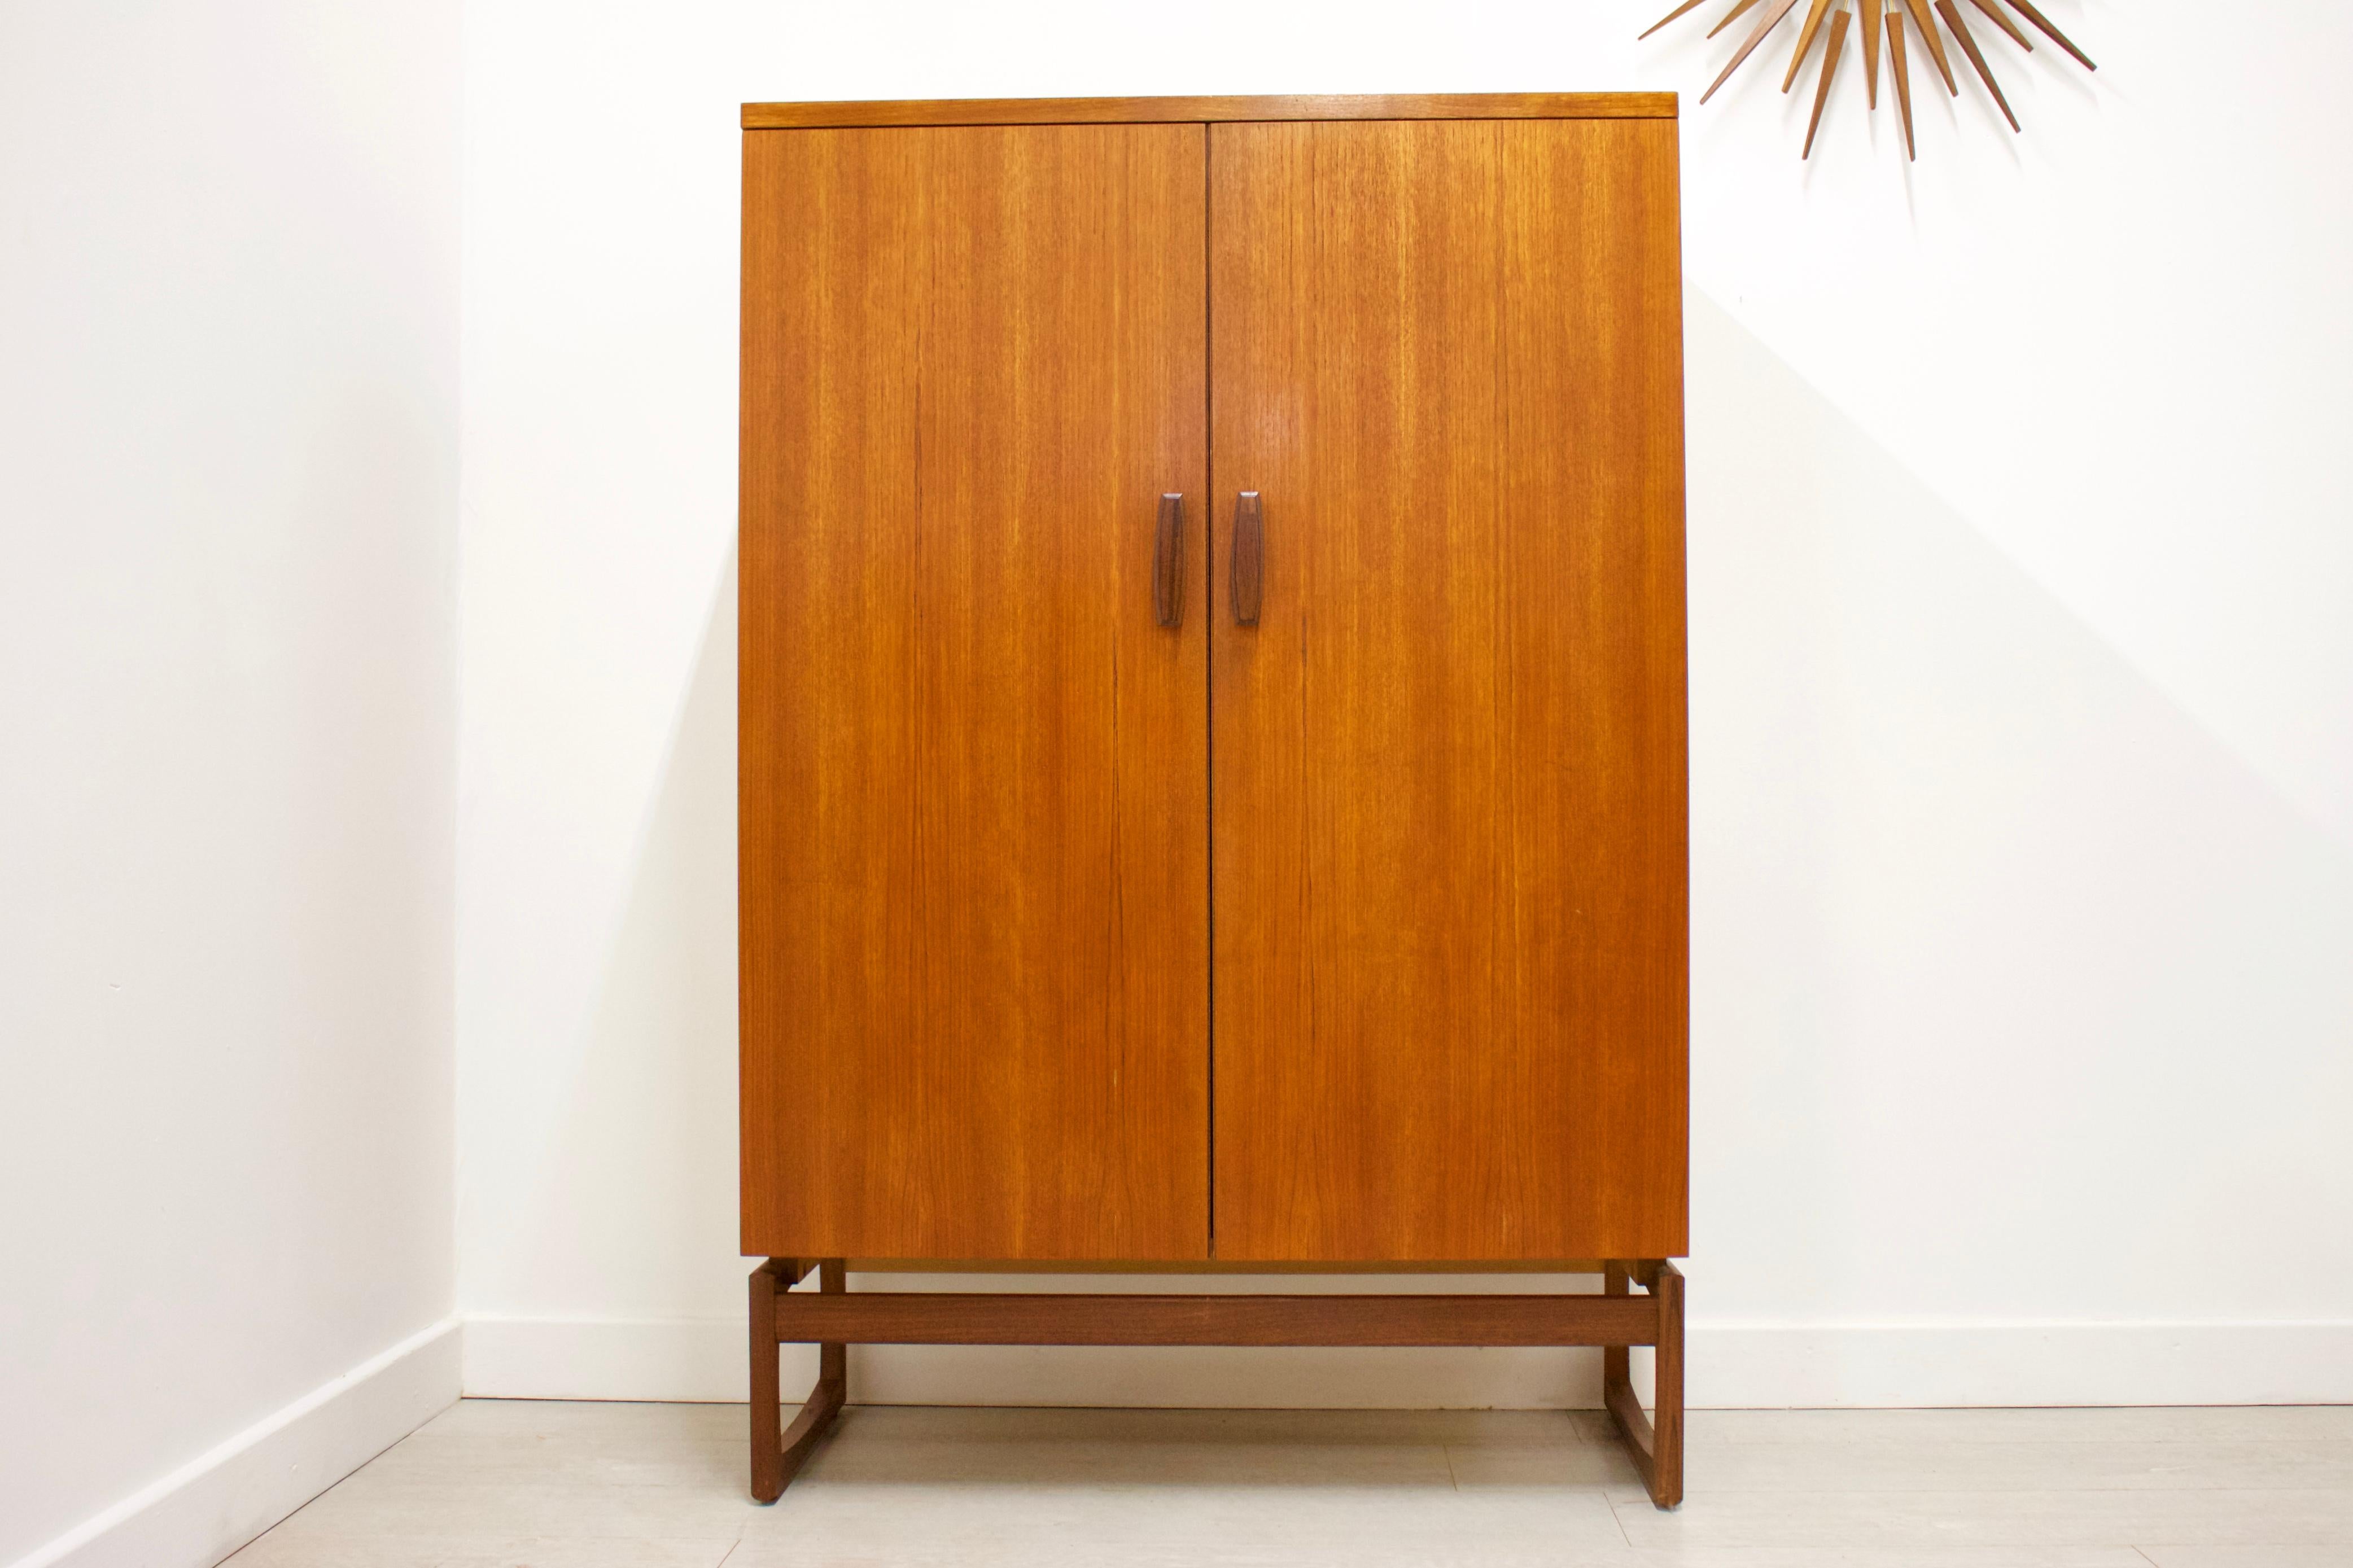 - Mid-Century Modern wardrobe
- Manufactured by G-Plan
- Made from Teak
- Features a pull-out hanging rail on the left, 2 drawers on the top right and 2 shelves on the bottom left for ample storage.